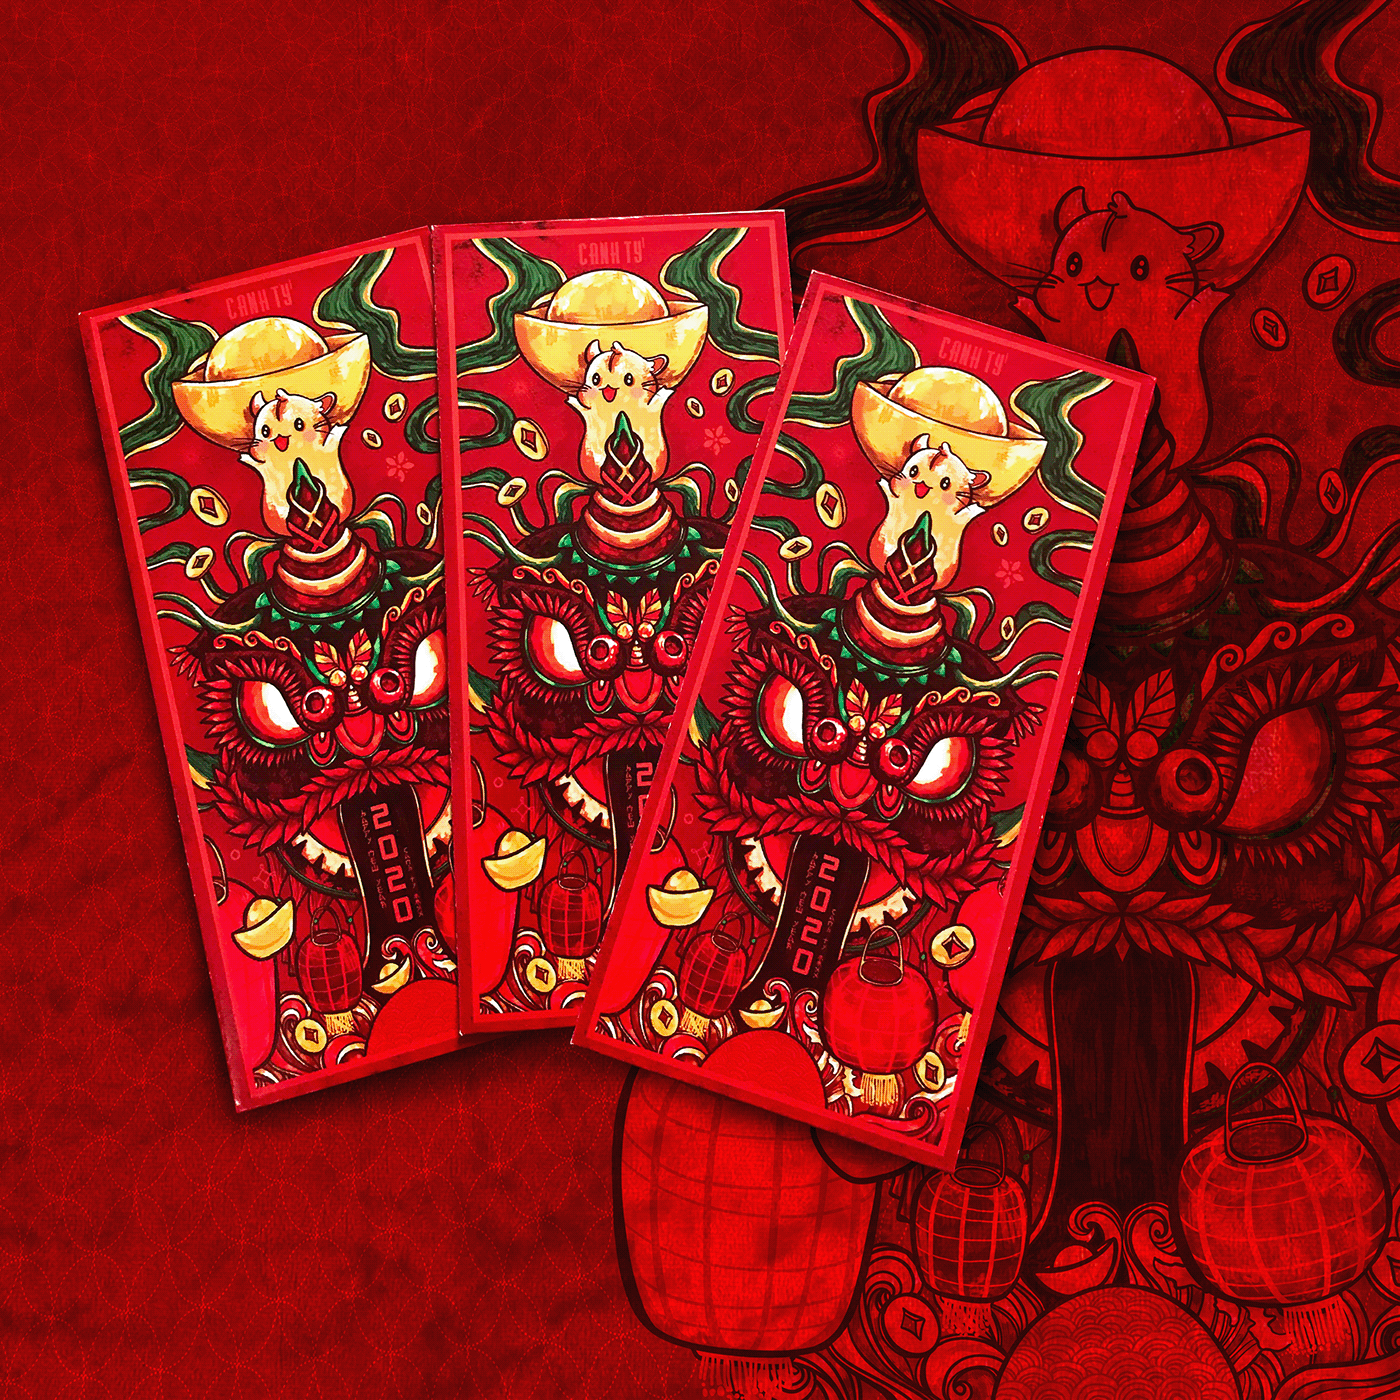 lucky money tet Lunar New Year chinese new year rat ILLUSTRATION  Red Envelope 2020 new year Tet Holiday graphic design 